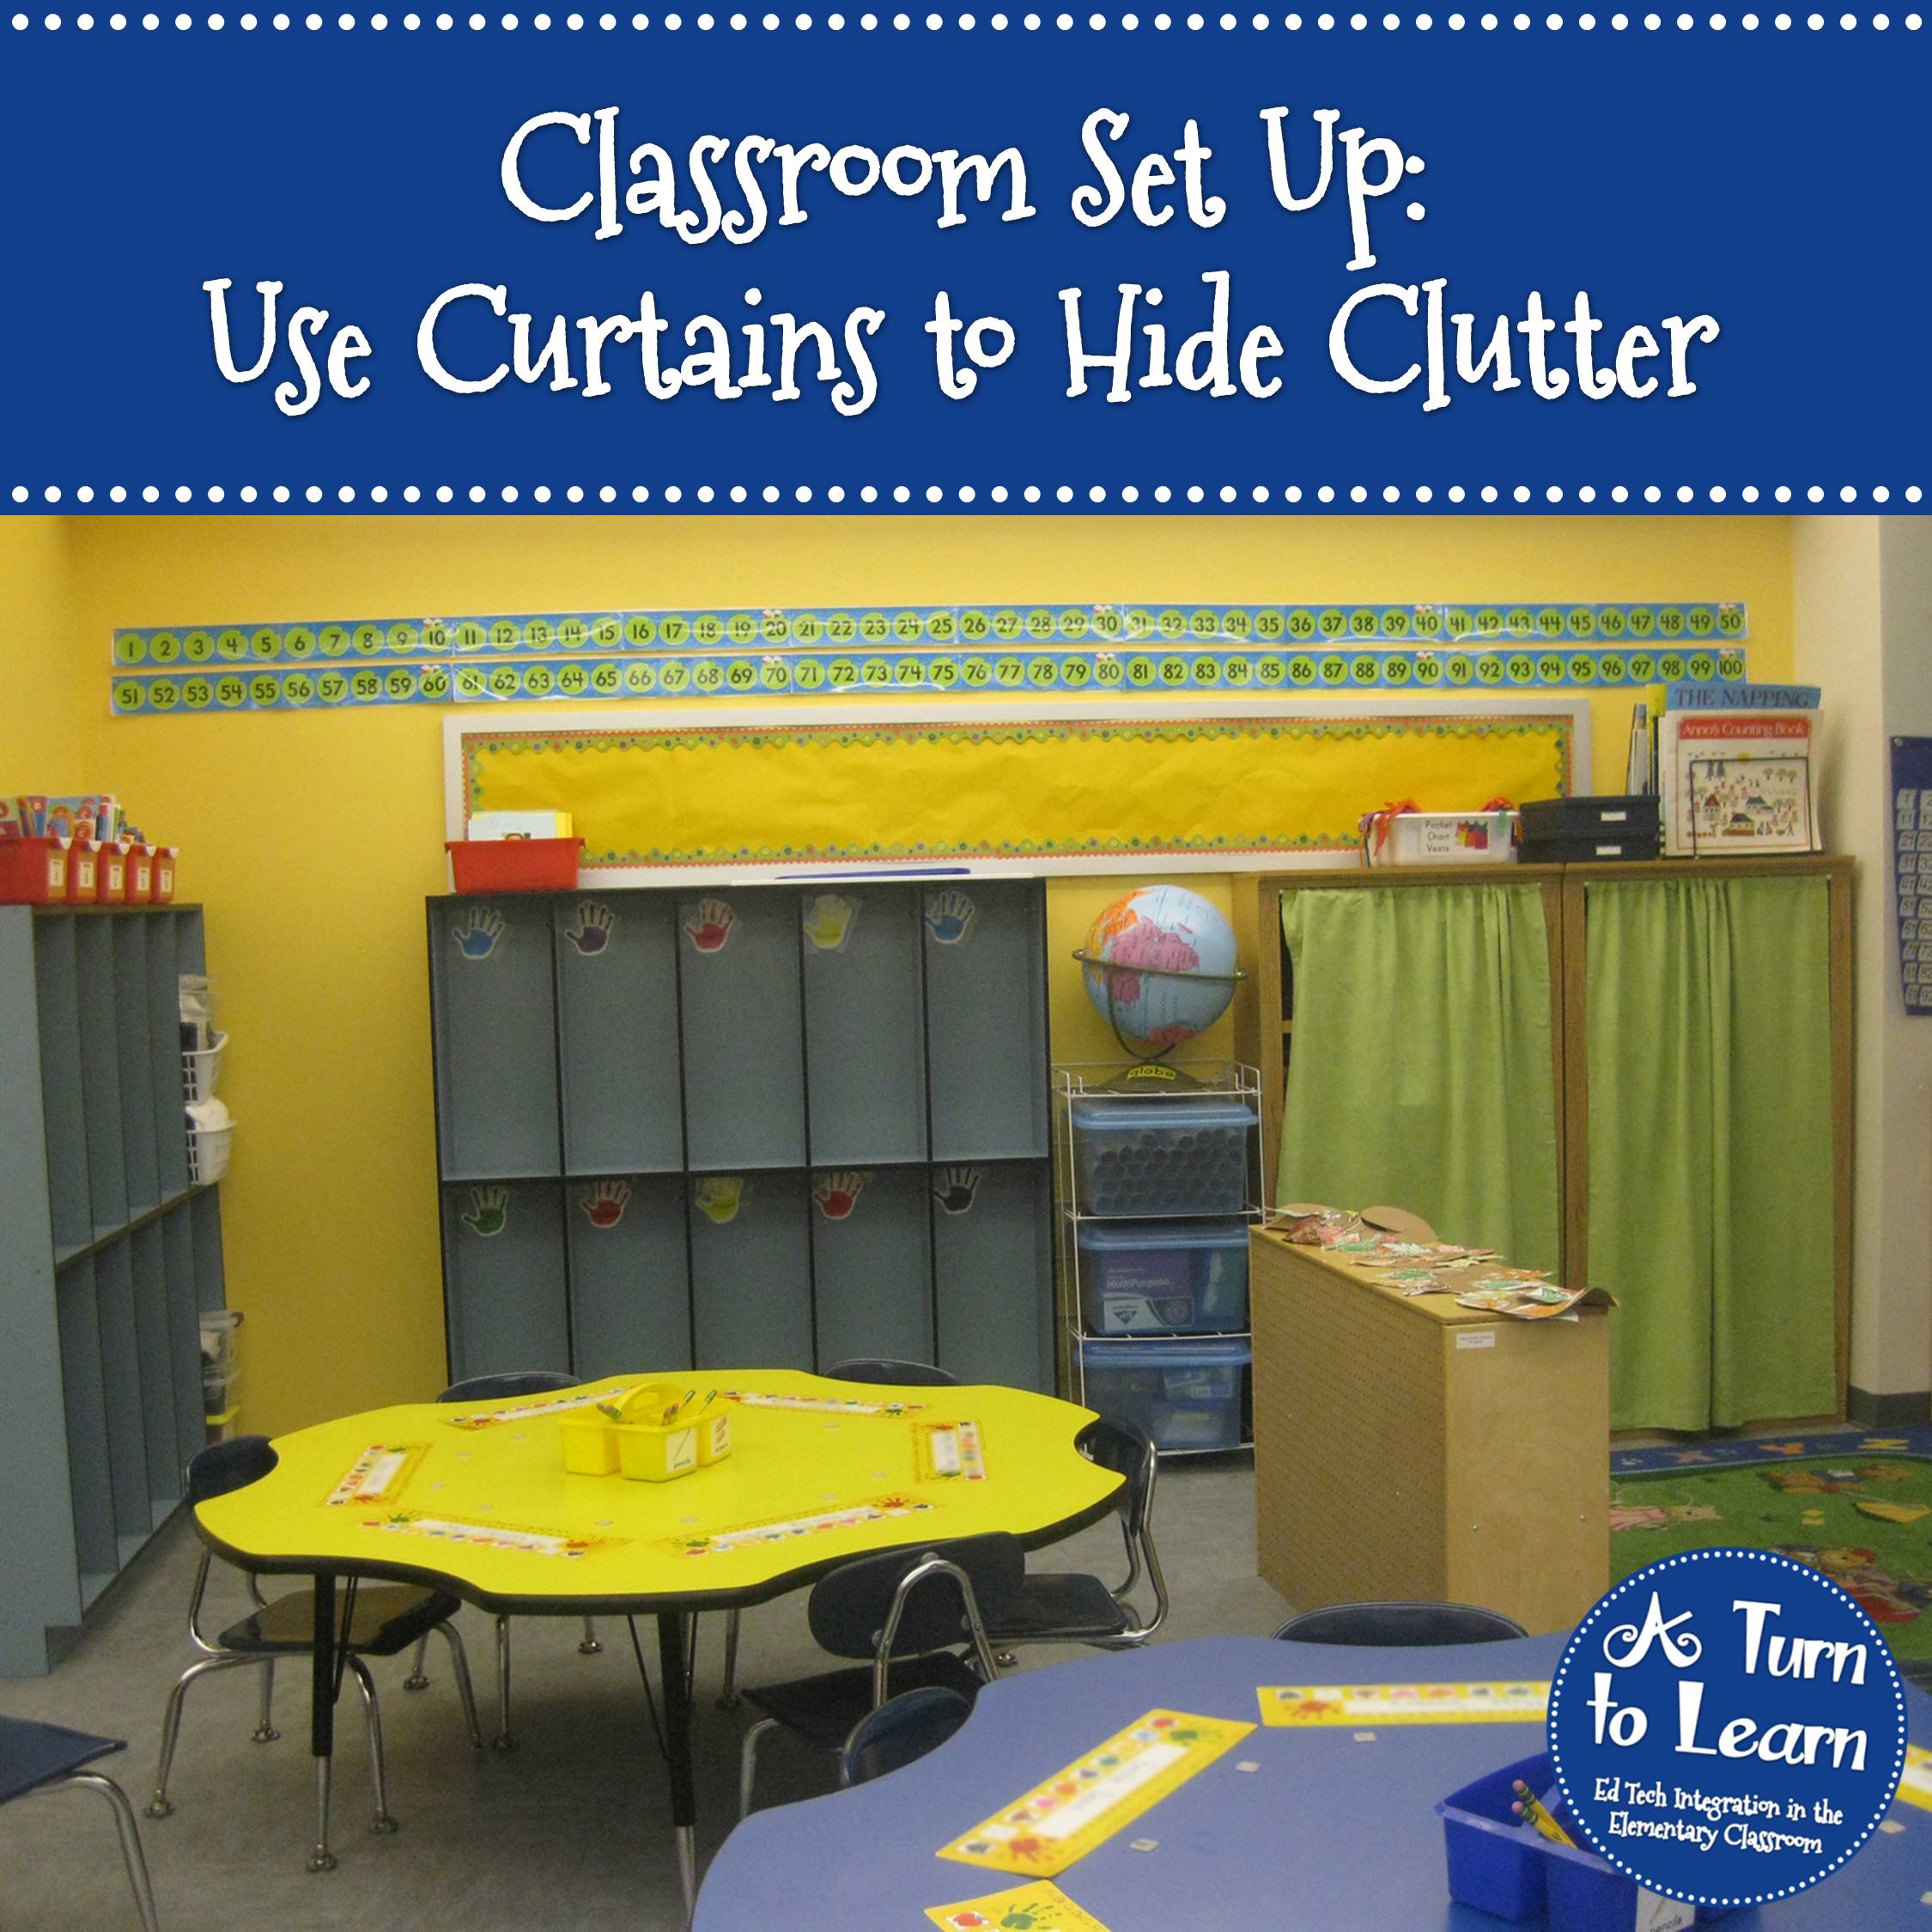 Kindergarten Classroom Pictures: Use Curtains to Hide Clutter